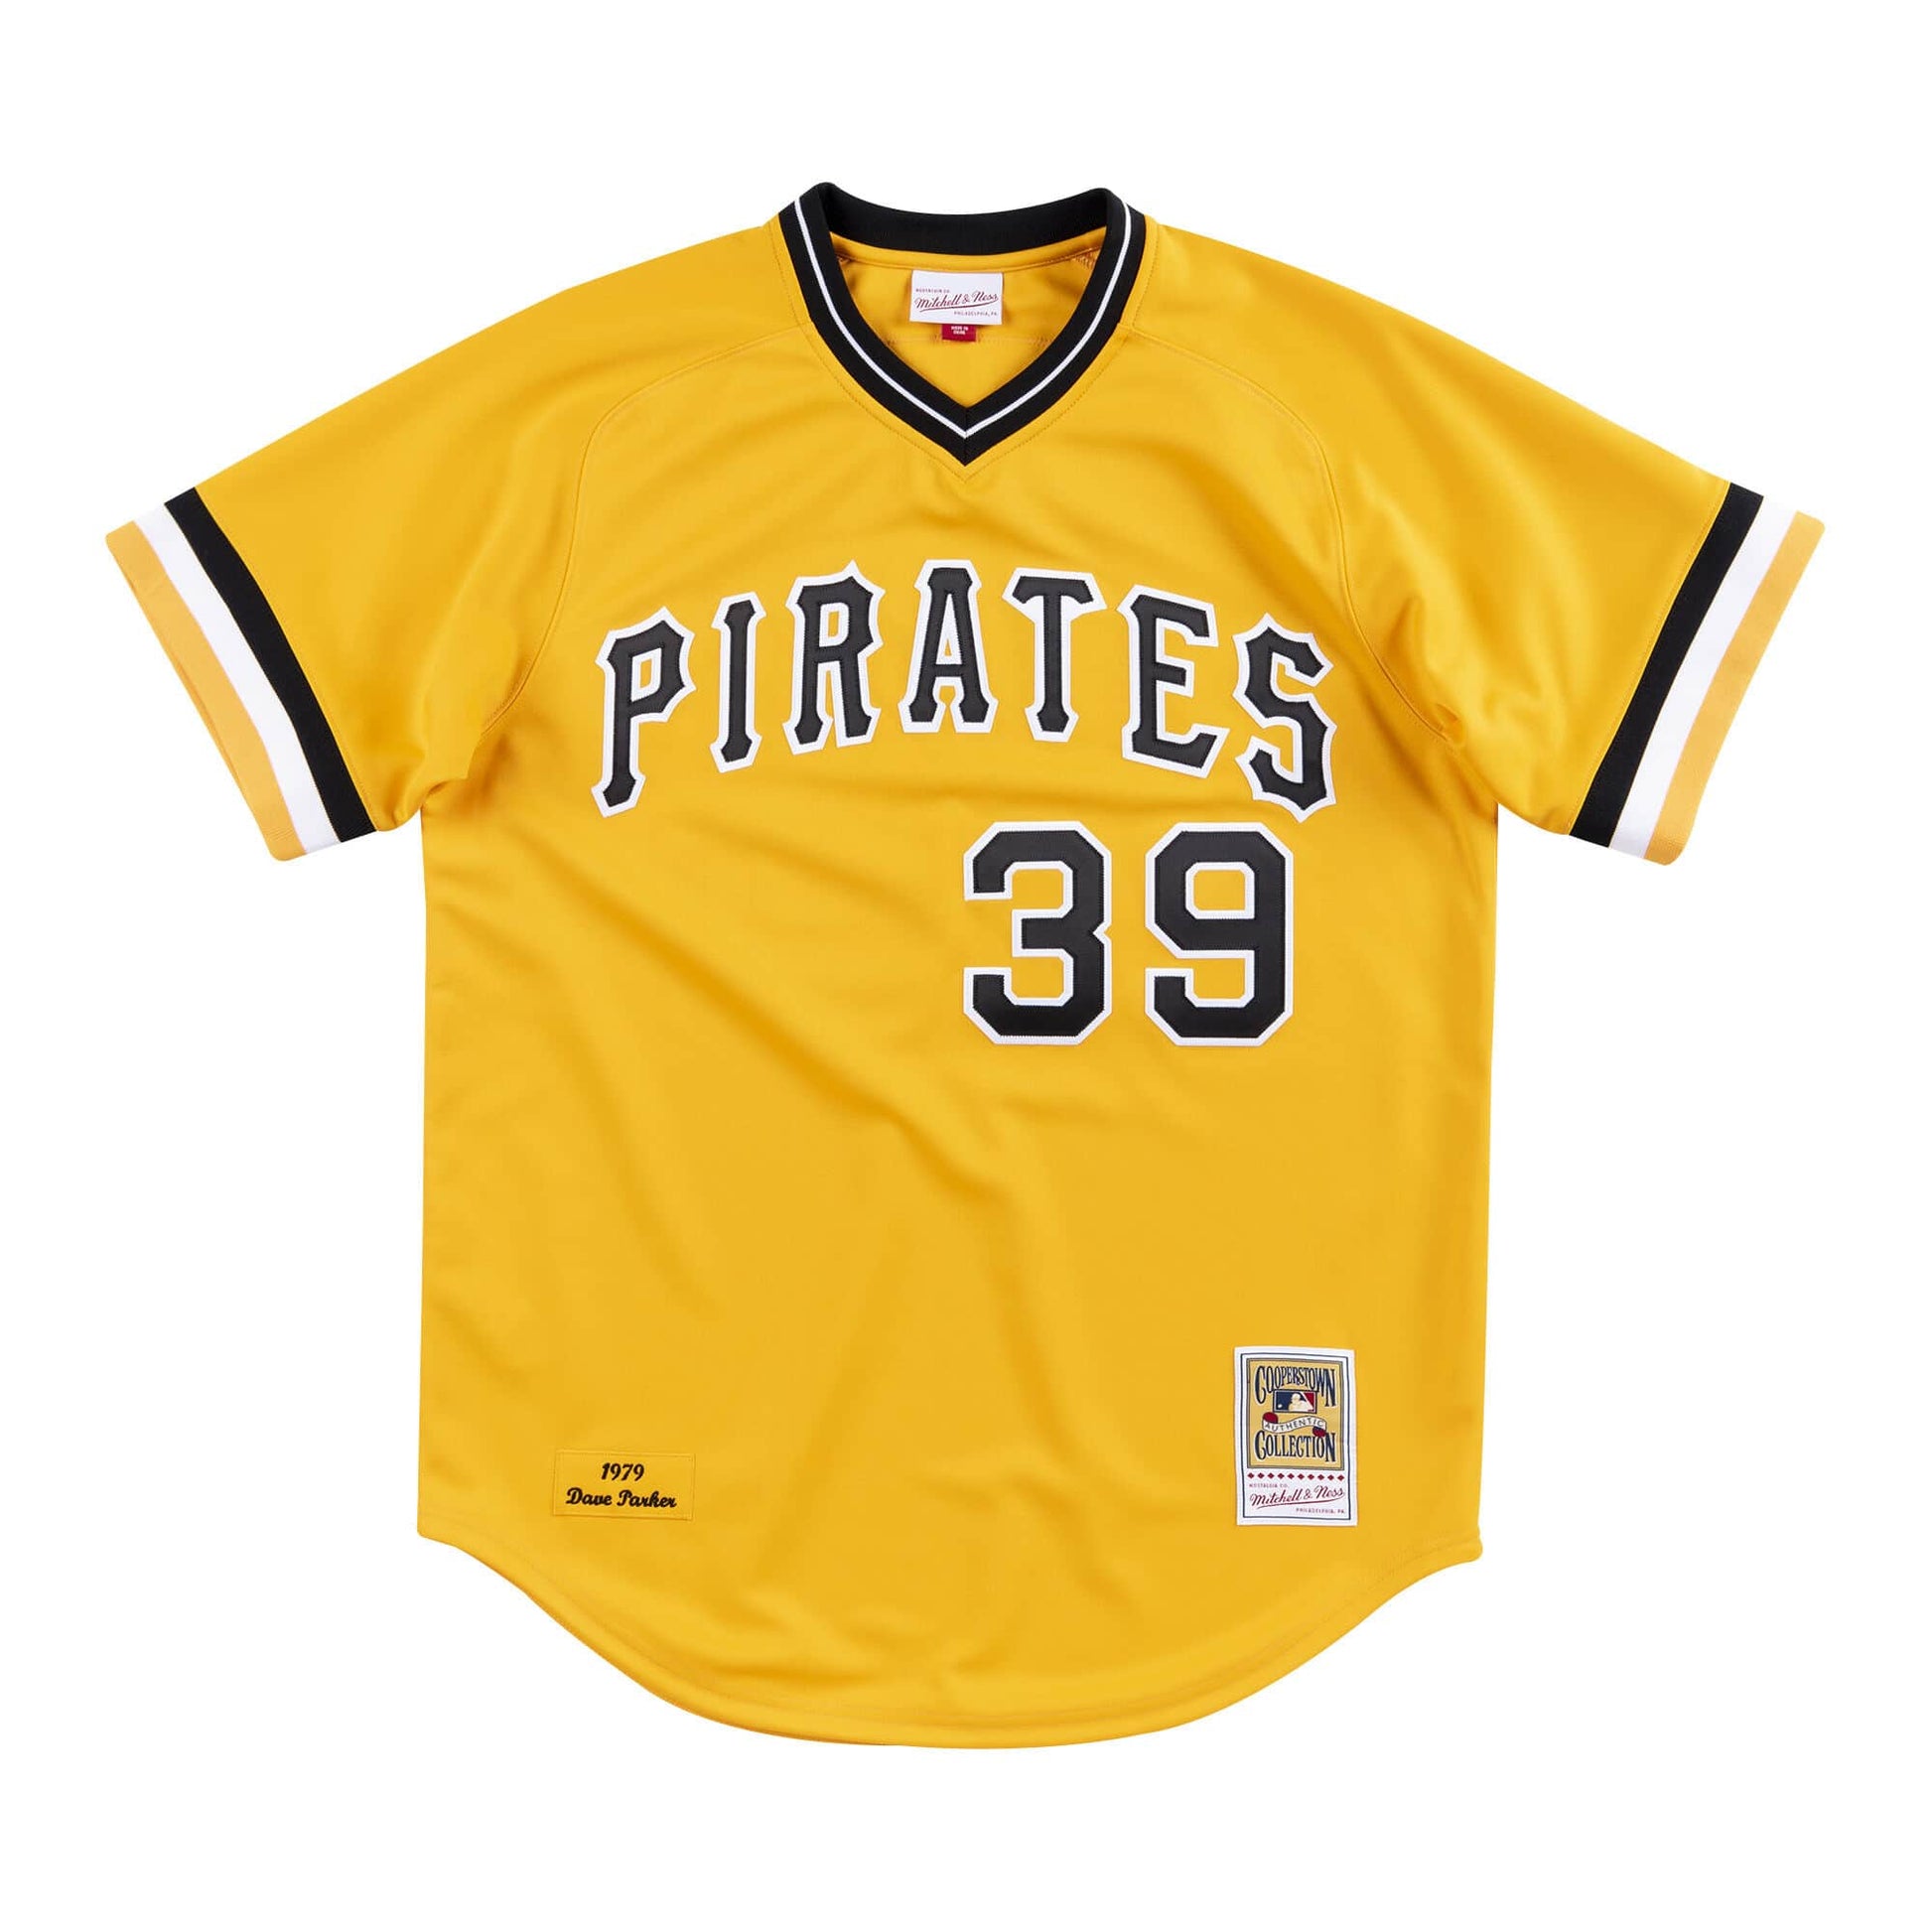 Authentic Jersey Pittsburgh Pirates Road World Series 1979 Dave Parker –  The Jersey Junction